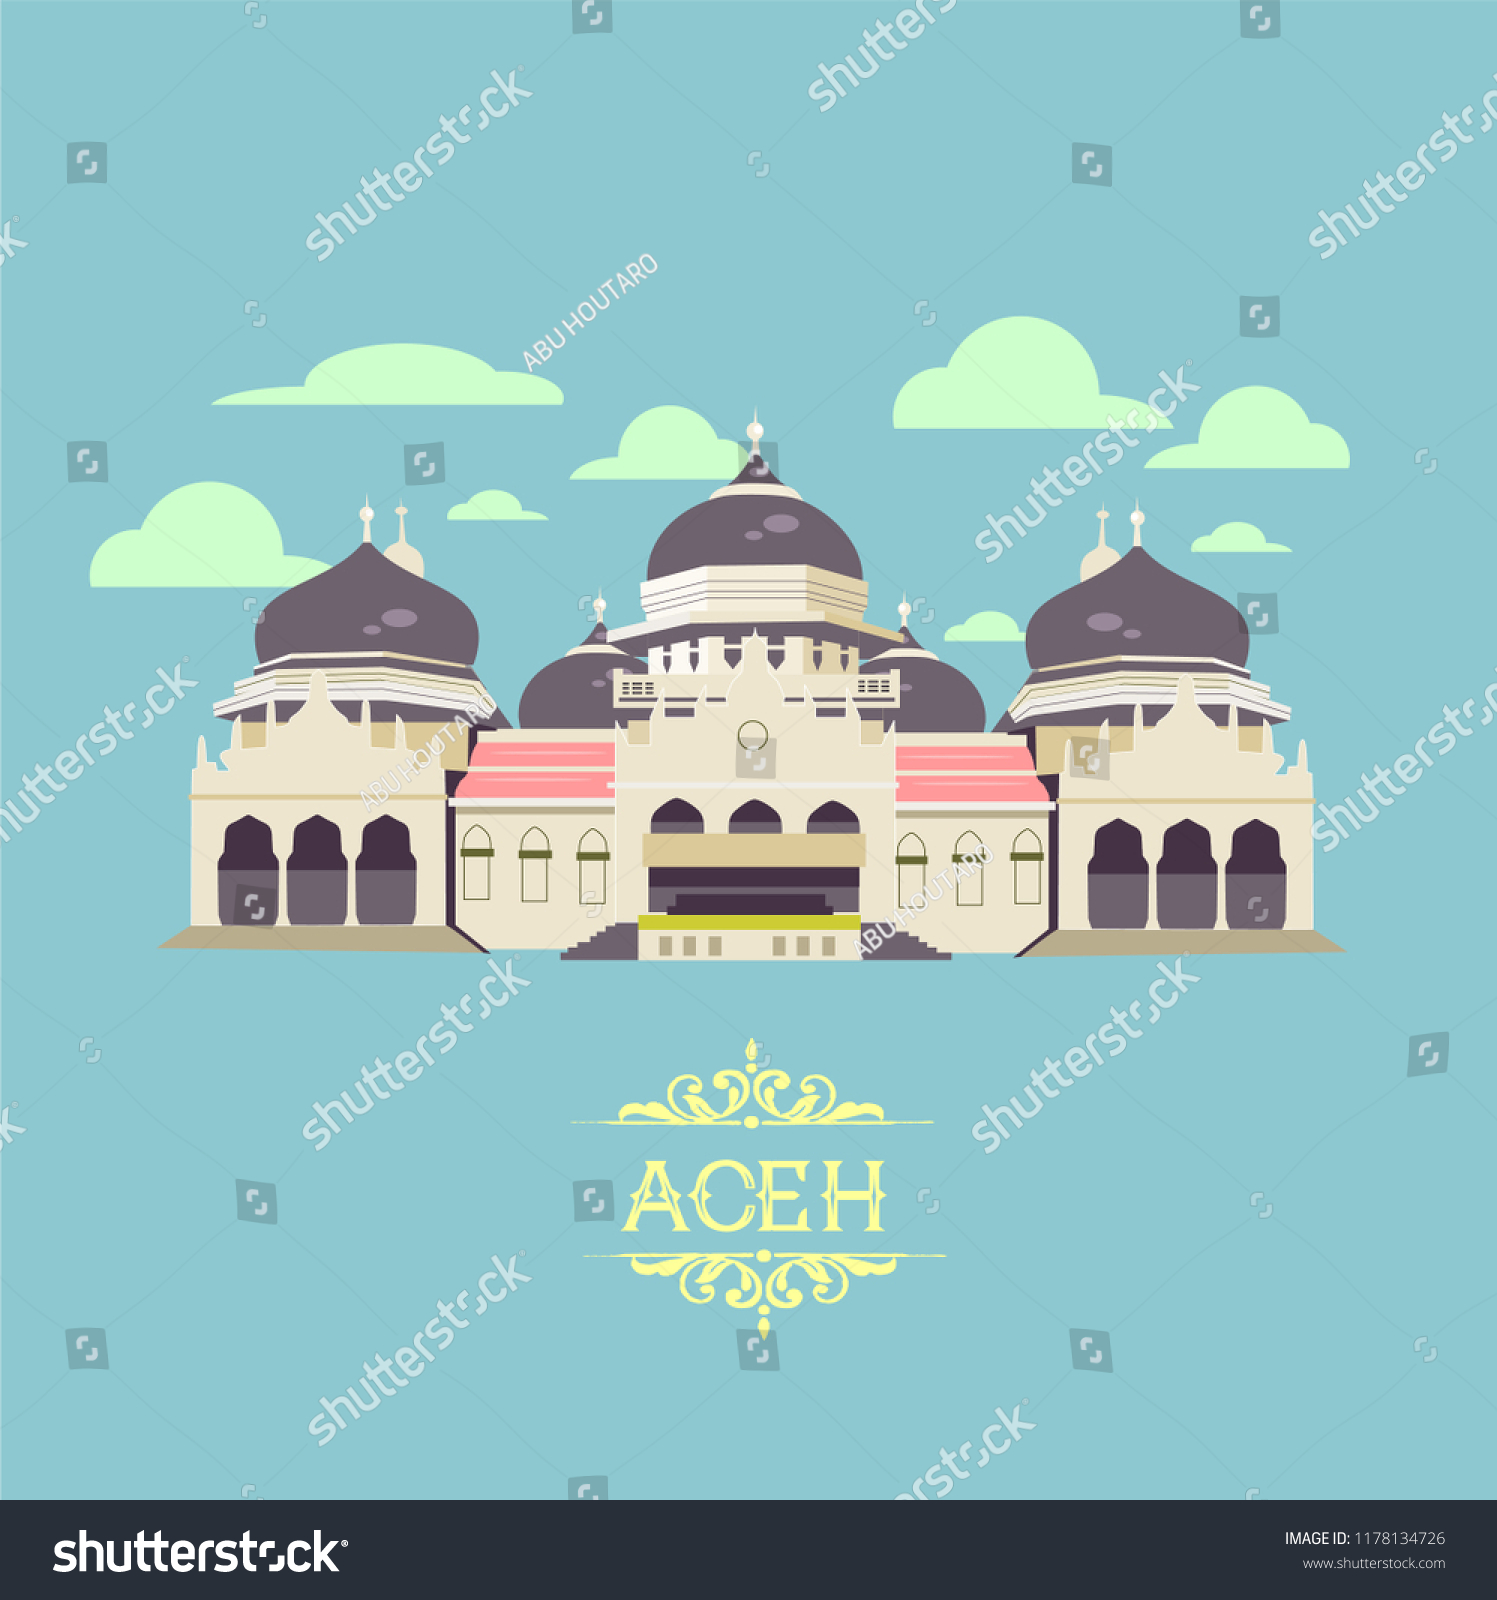 SVG of aceh mosque in indonesia svg